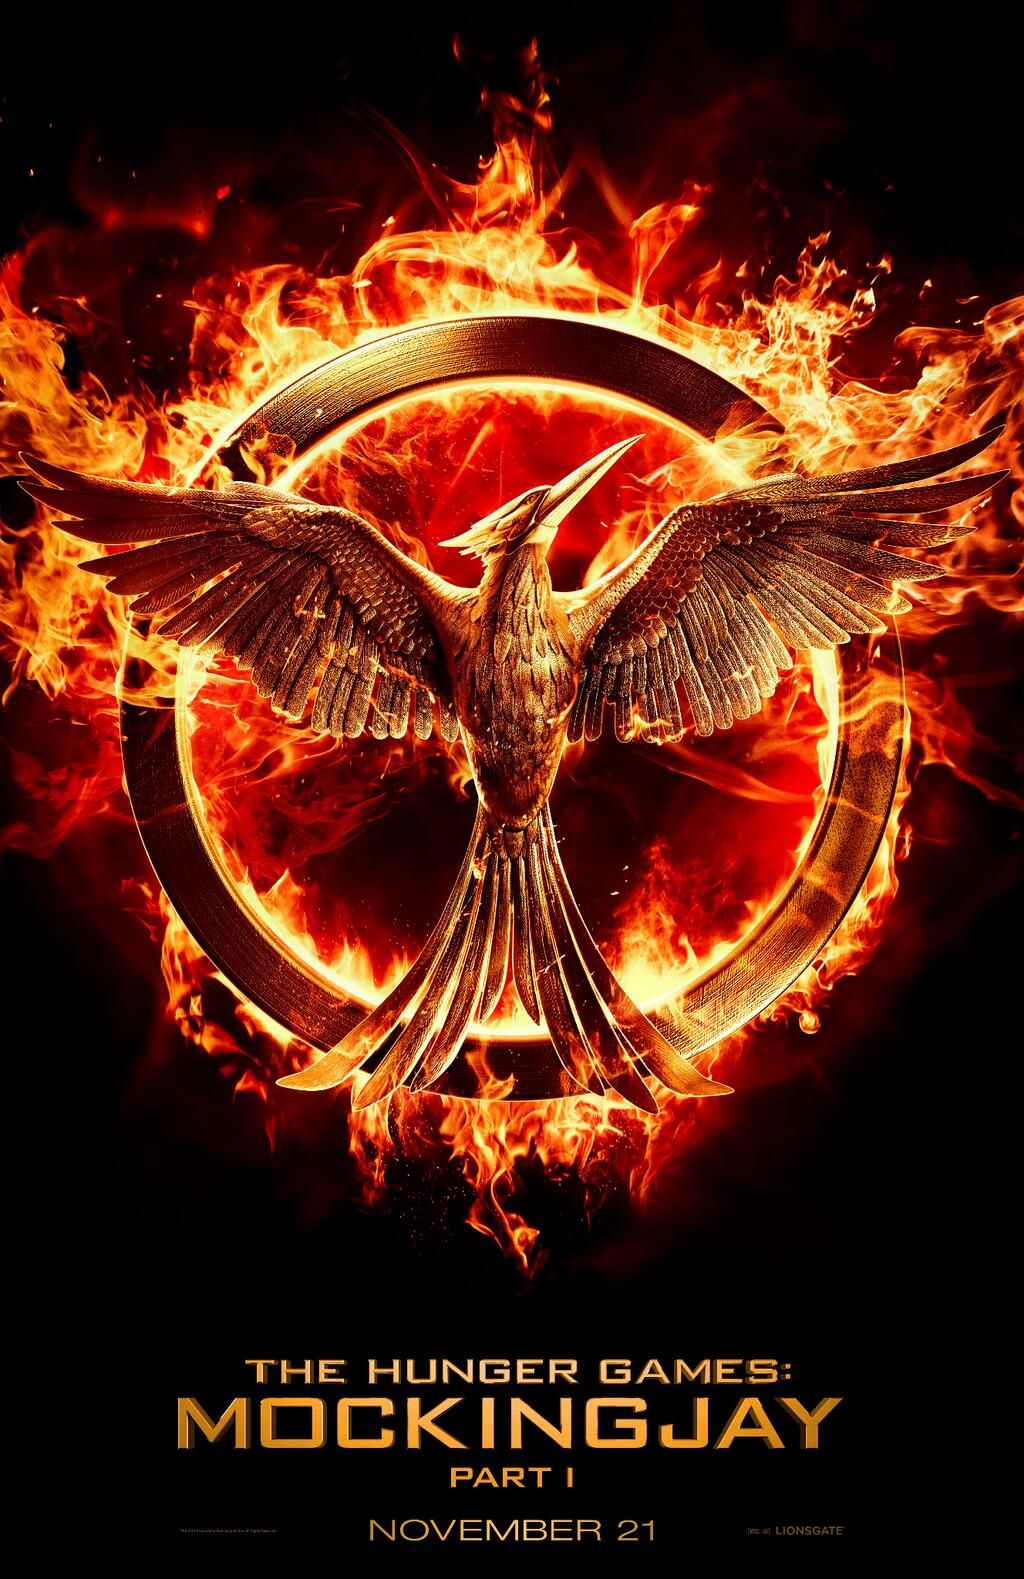 The Hunger Games: Mockingjay - Part 1 Trailer to Debut on Samsung